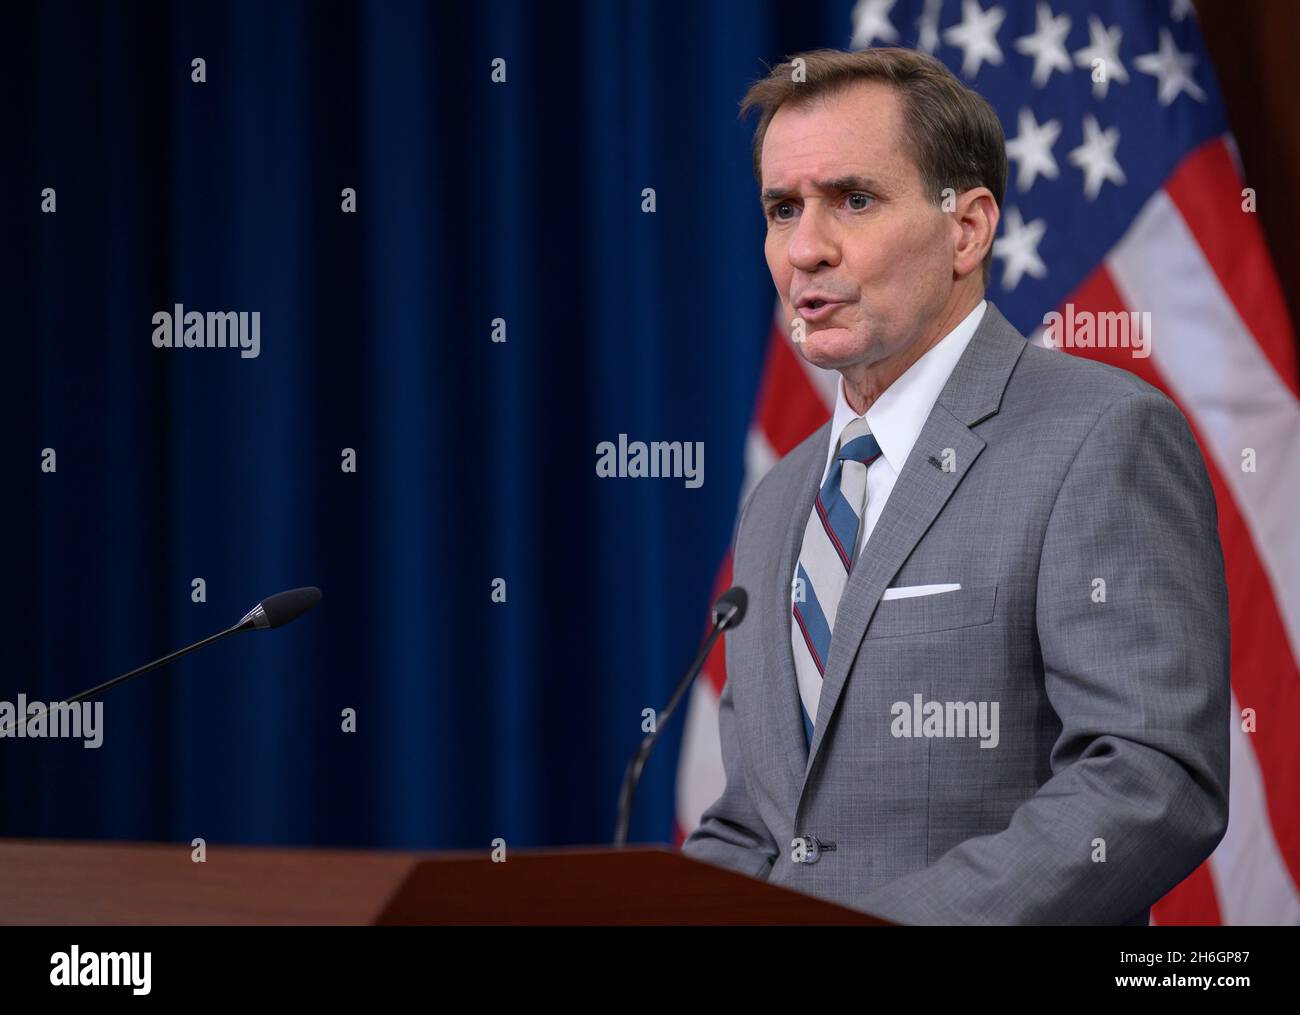 Arlington, United States Of America. 15th Nov, 2021. Arlington, United States of America. 15 November, 2021. Pentagon Press Secretary John Kirby speaks at a press briefing at the Pentagon November 15, 2021 in Arlington, Virginia. Kirby said that Defense Sec. Austin has not yet spoken to Oklahoma Gov. Kevin Stitt about the state National Guard refusal to follow the COVID-19 vaccine mandate. Credit: SSgt. Brittany Chase/DOD/Alamy Live News Stock Photo